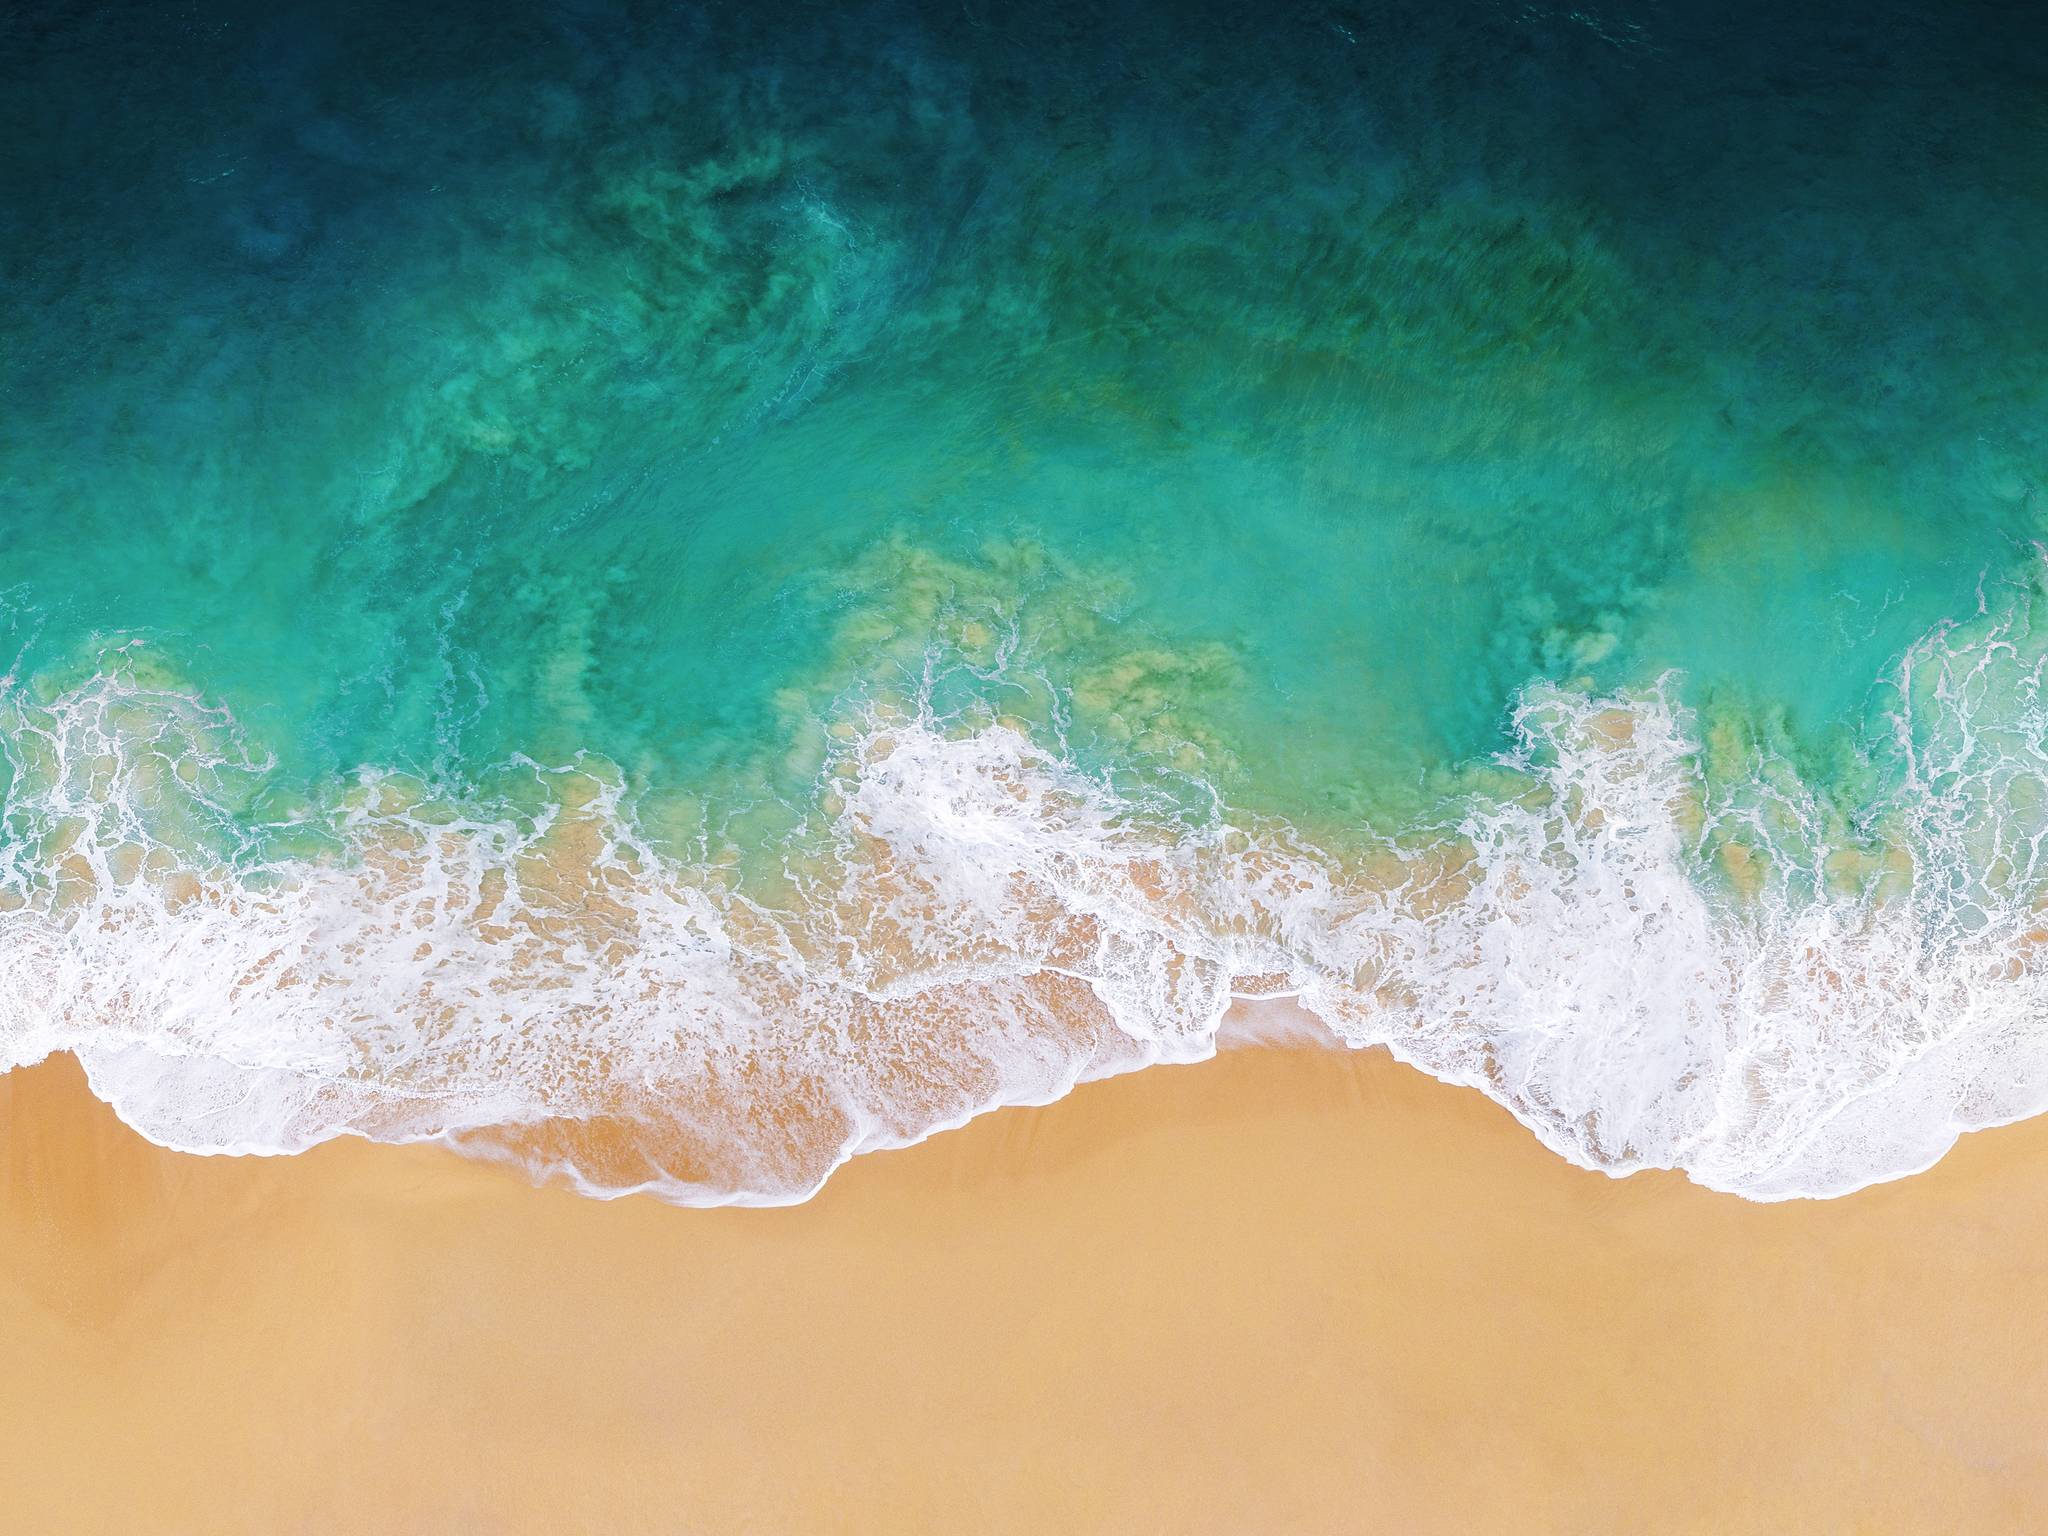 Download And Install The iOS 11 Wallpaper For iPhone iPad And Mac